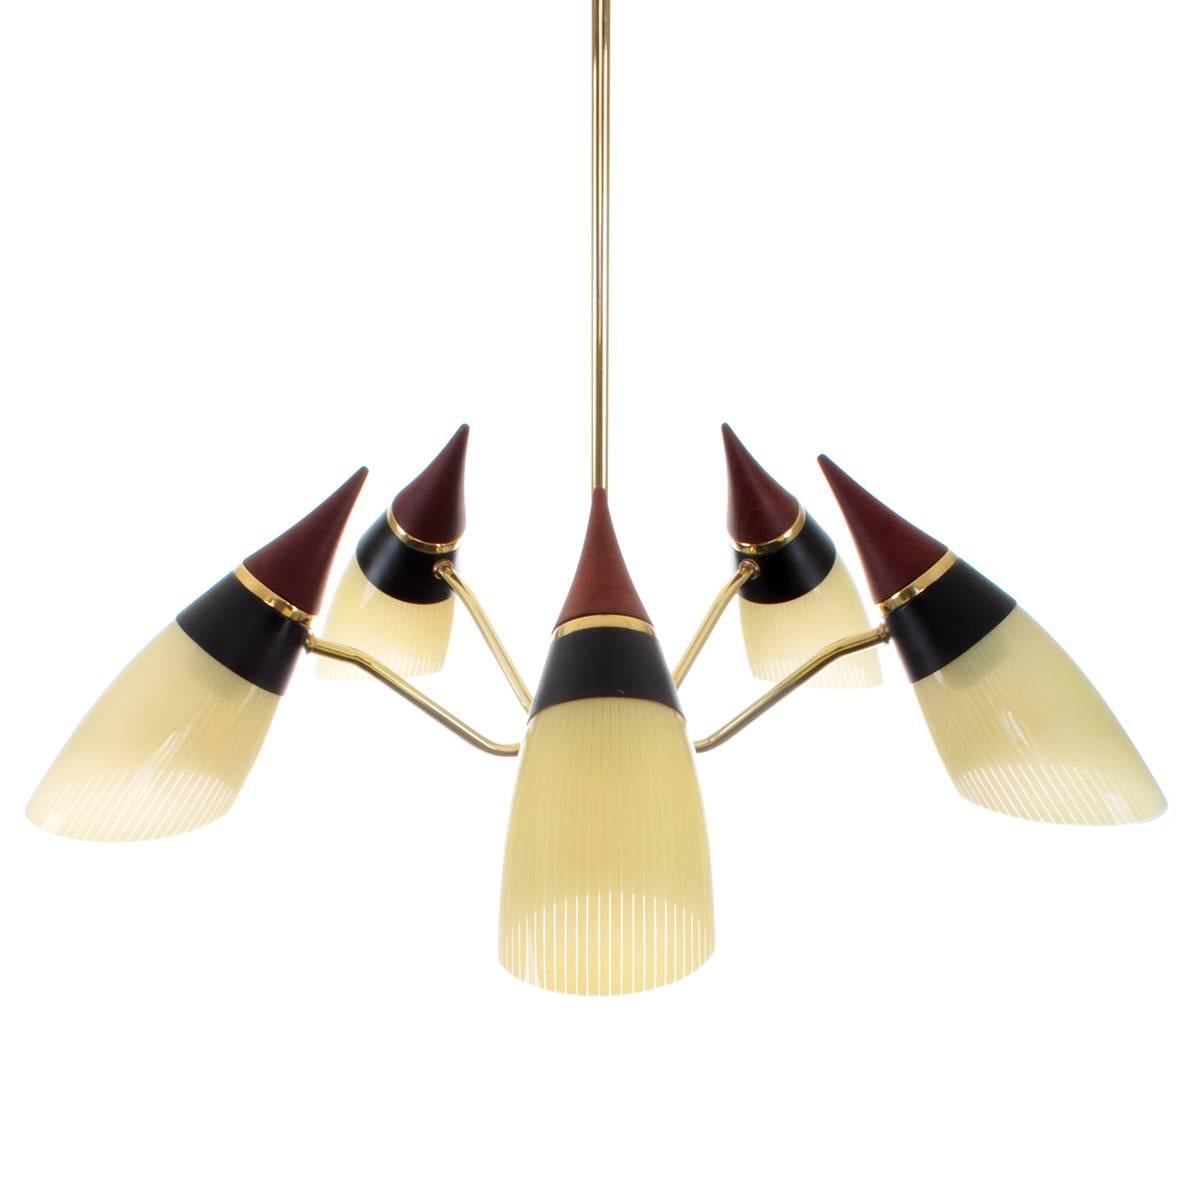 Lacquered Five-Light Chandelier Opaline Glass Shades & Teak Tops, Art Deco from the 1950s